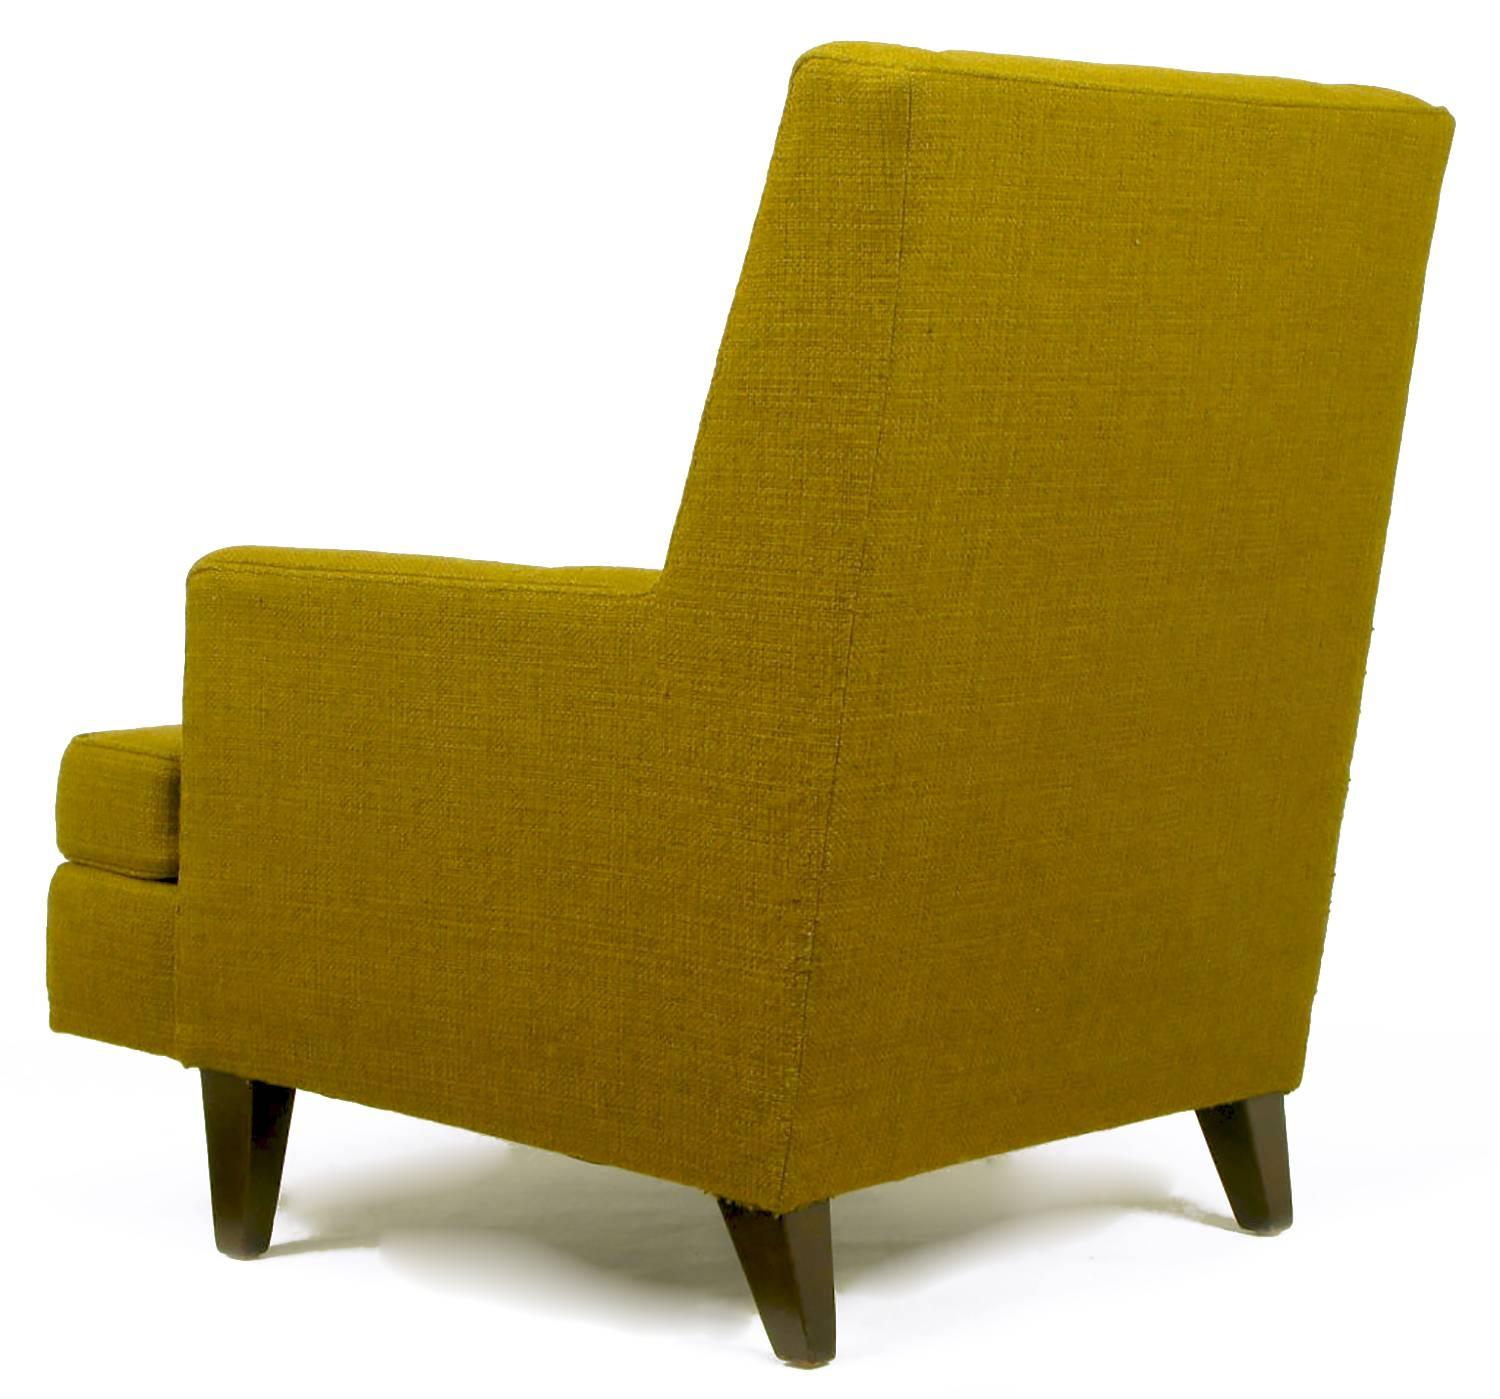 Edward Wormley Lounge Chair in Moss Green Wool Upholstery In Excellent Condition For Sale In Chicago, IL